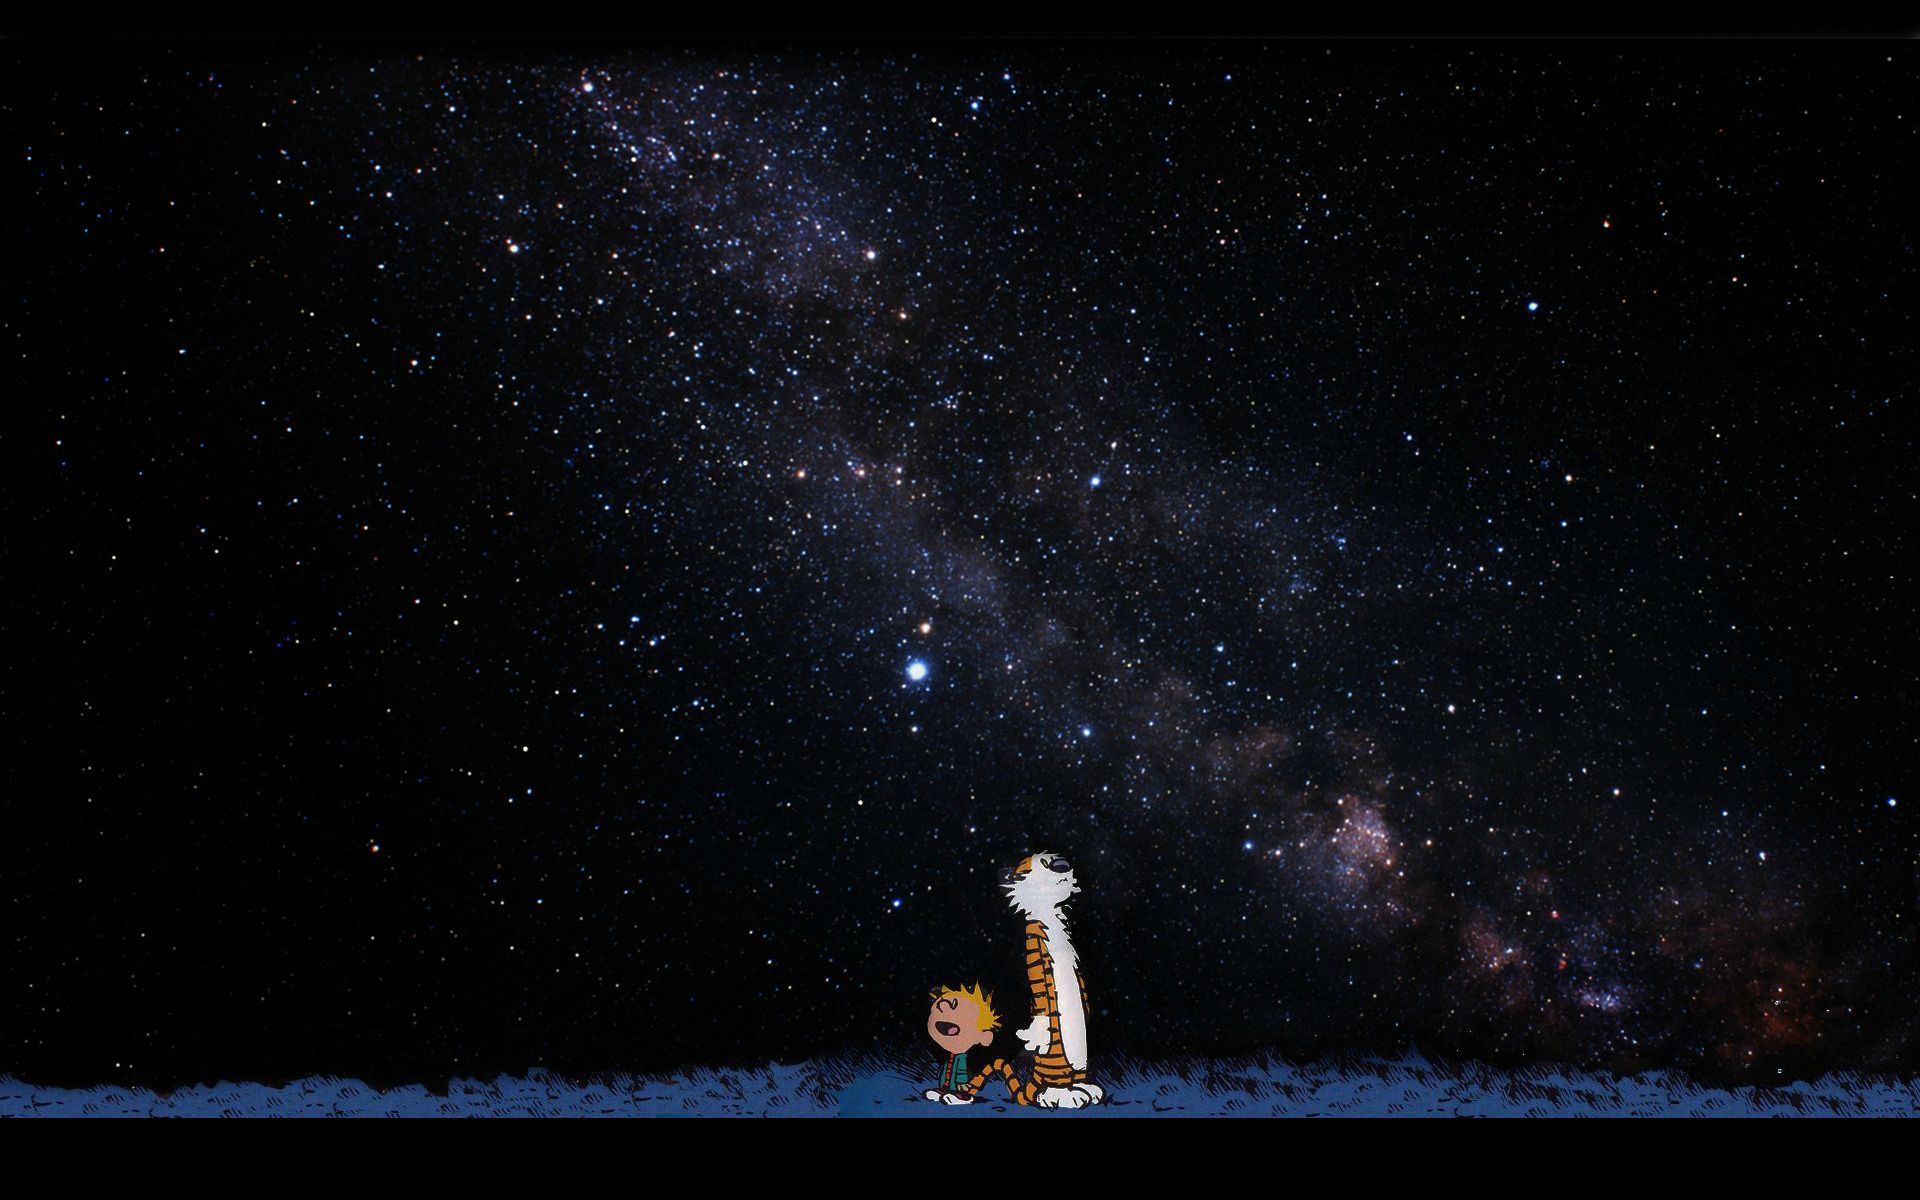 Calvin and Hobbes in awe